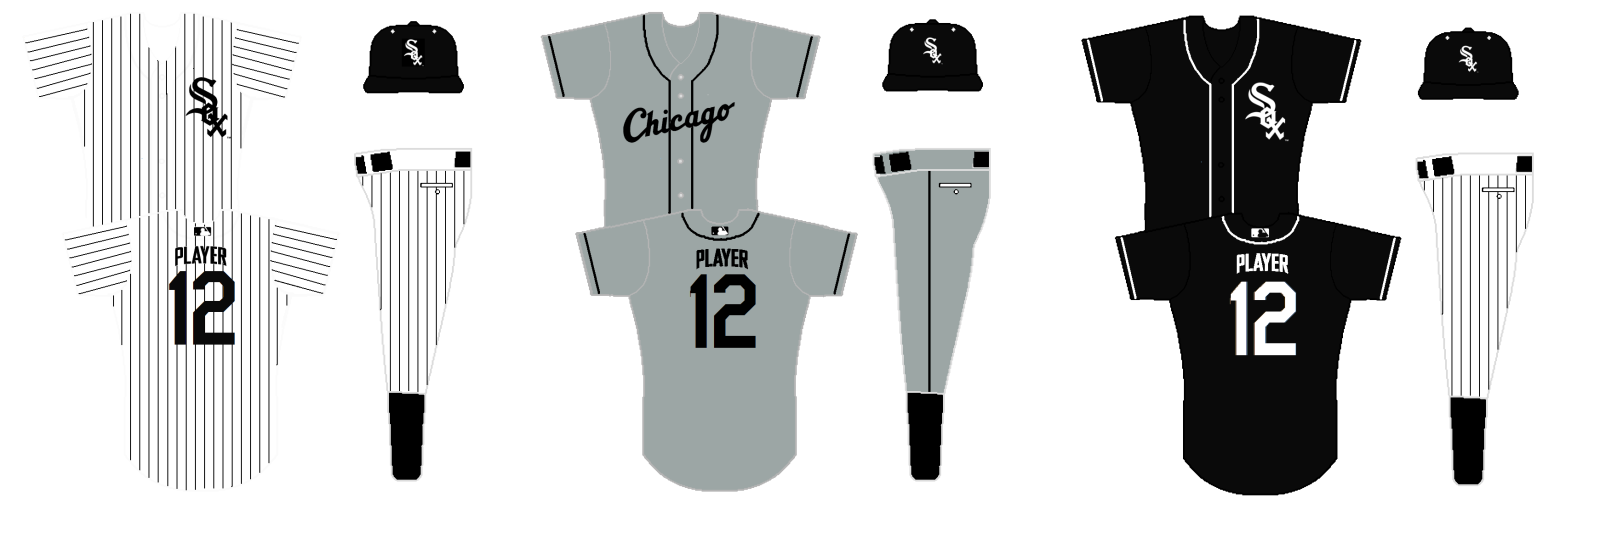 WhiteSoxConceptFinal2.png